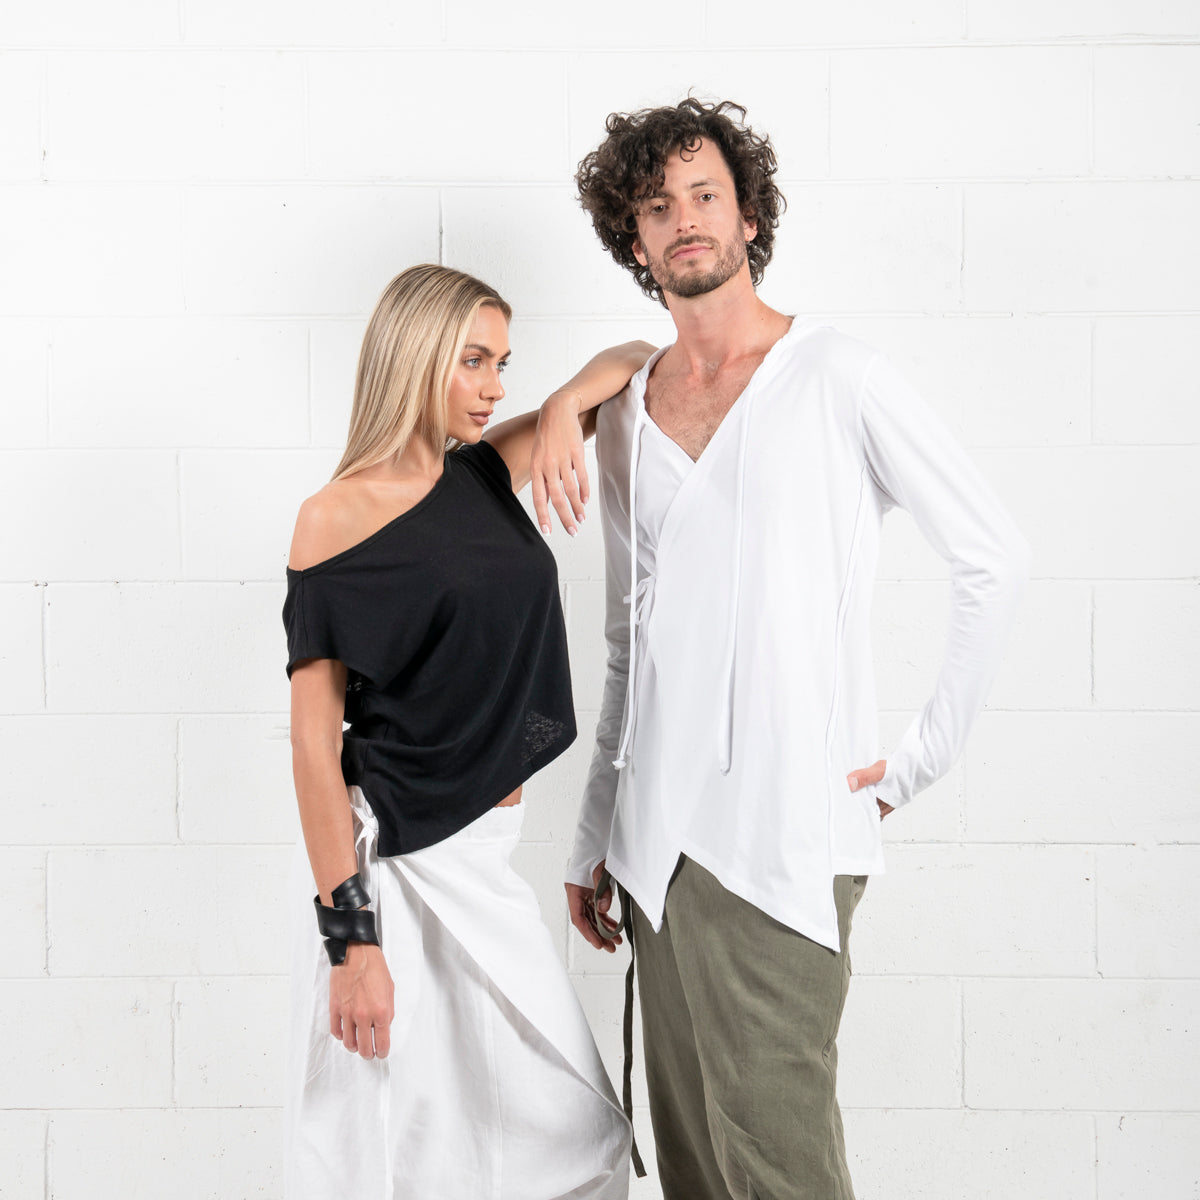 Fashionable couple posing in a studio, woman in a black off-shoulder top and white pants, man in a white hooded shirt and green trousers